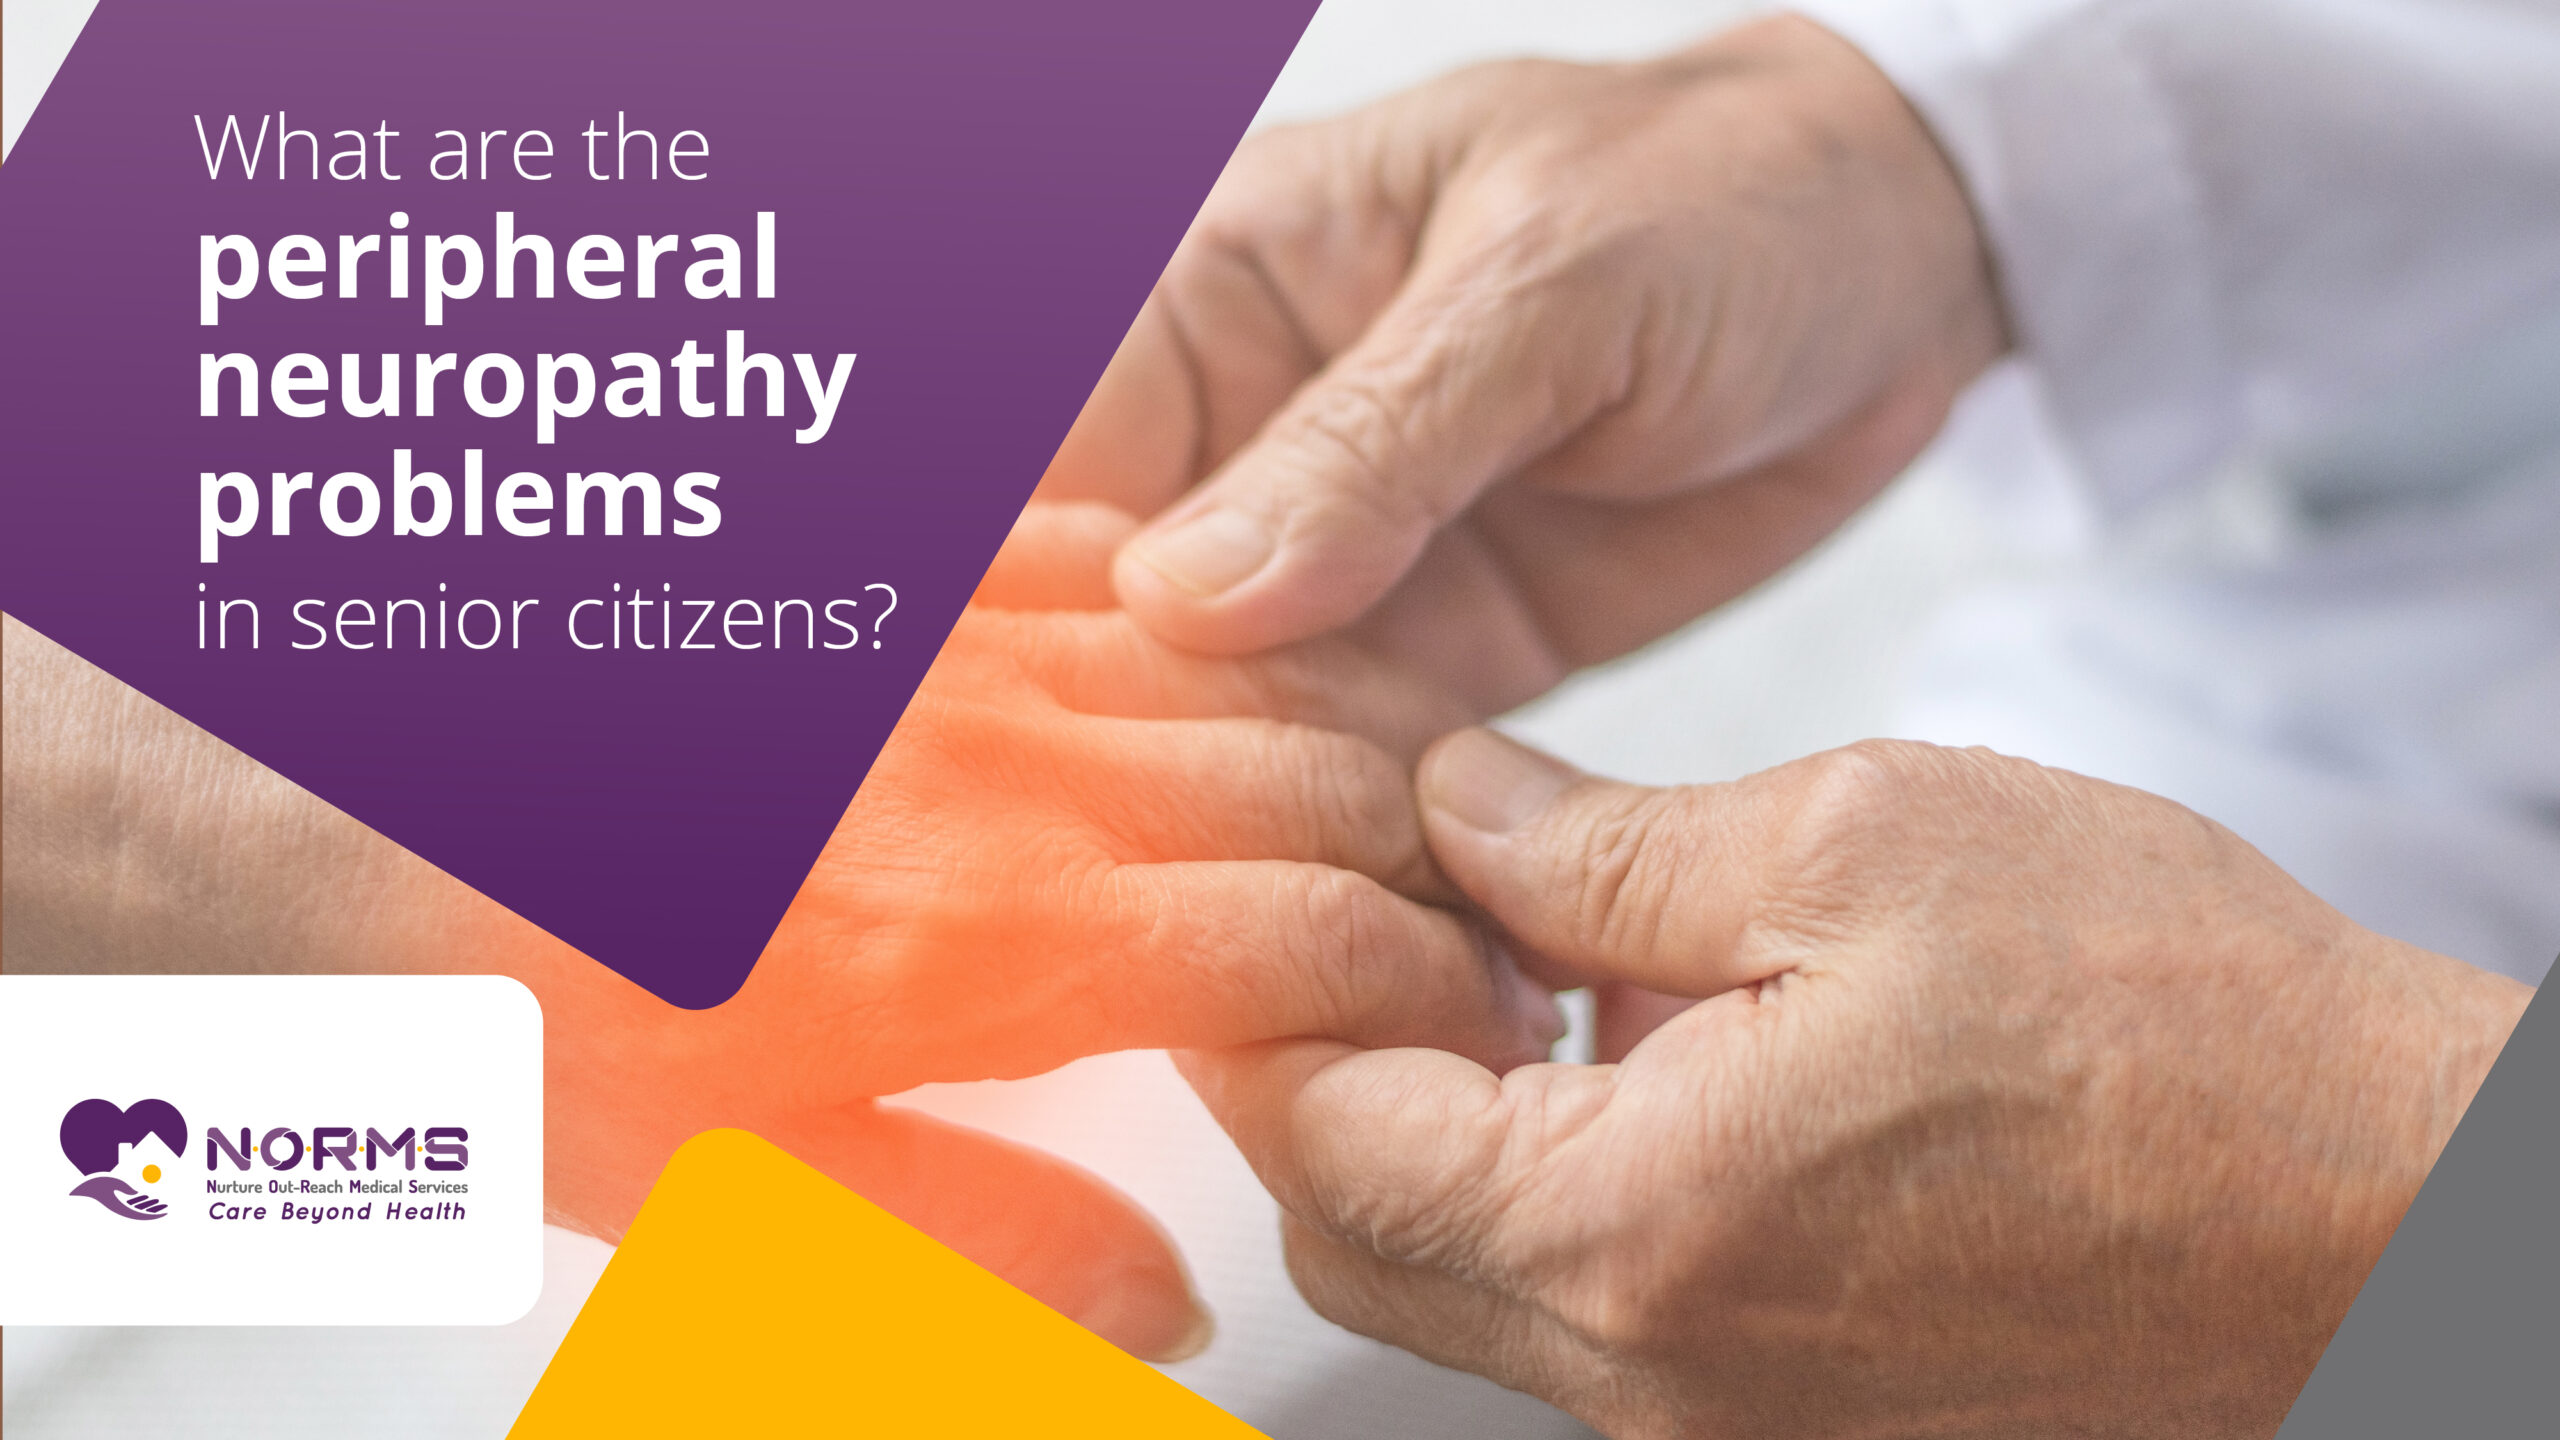 What are the peripheral neuropathy problems in senior adults?